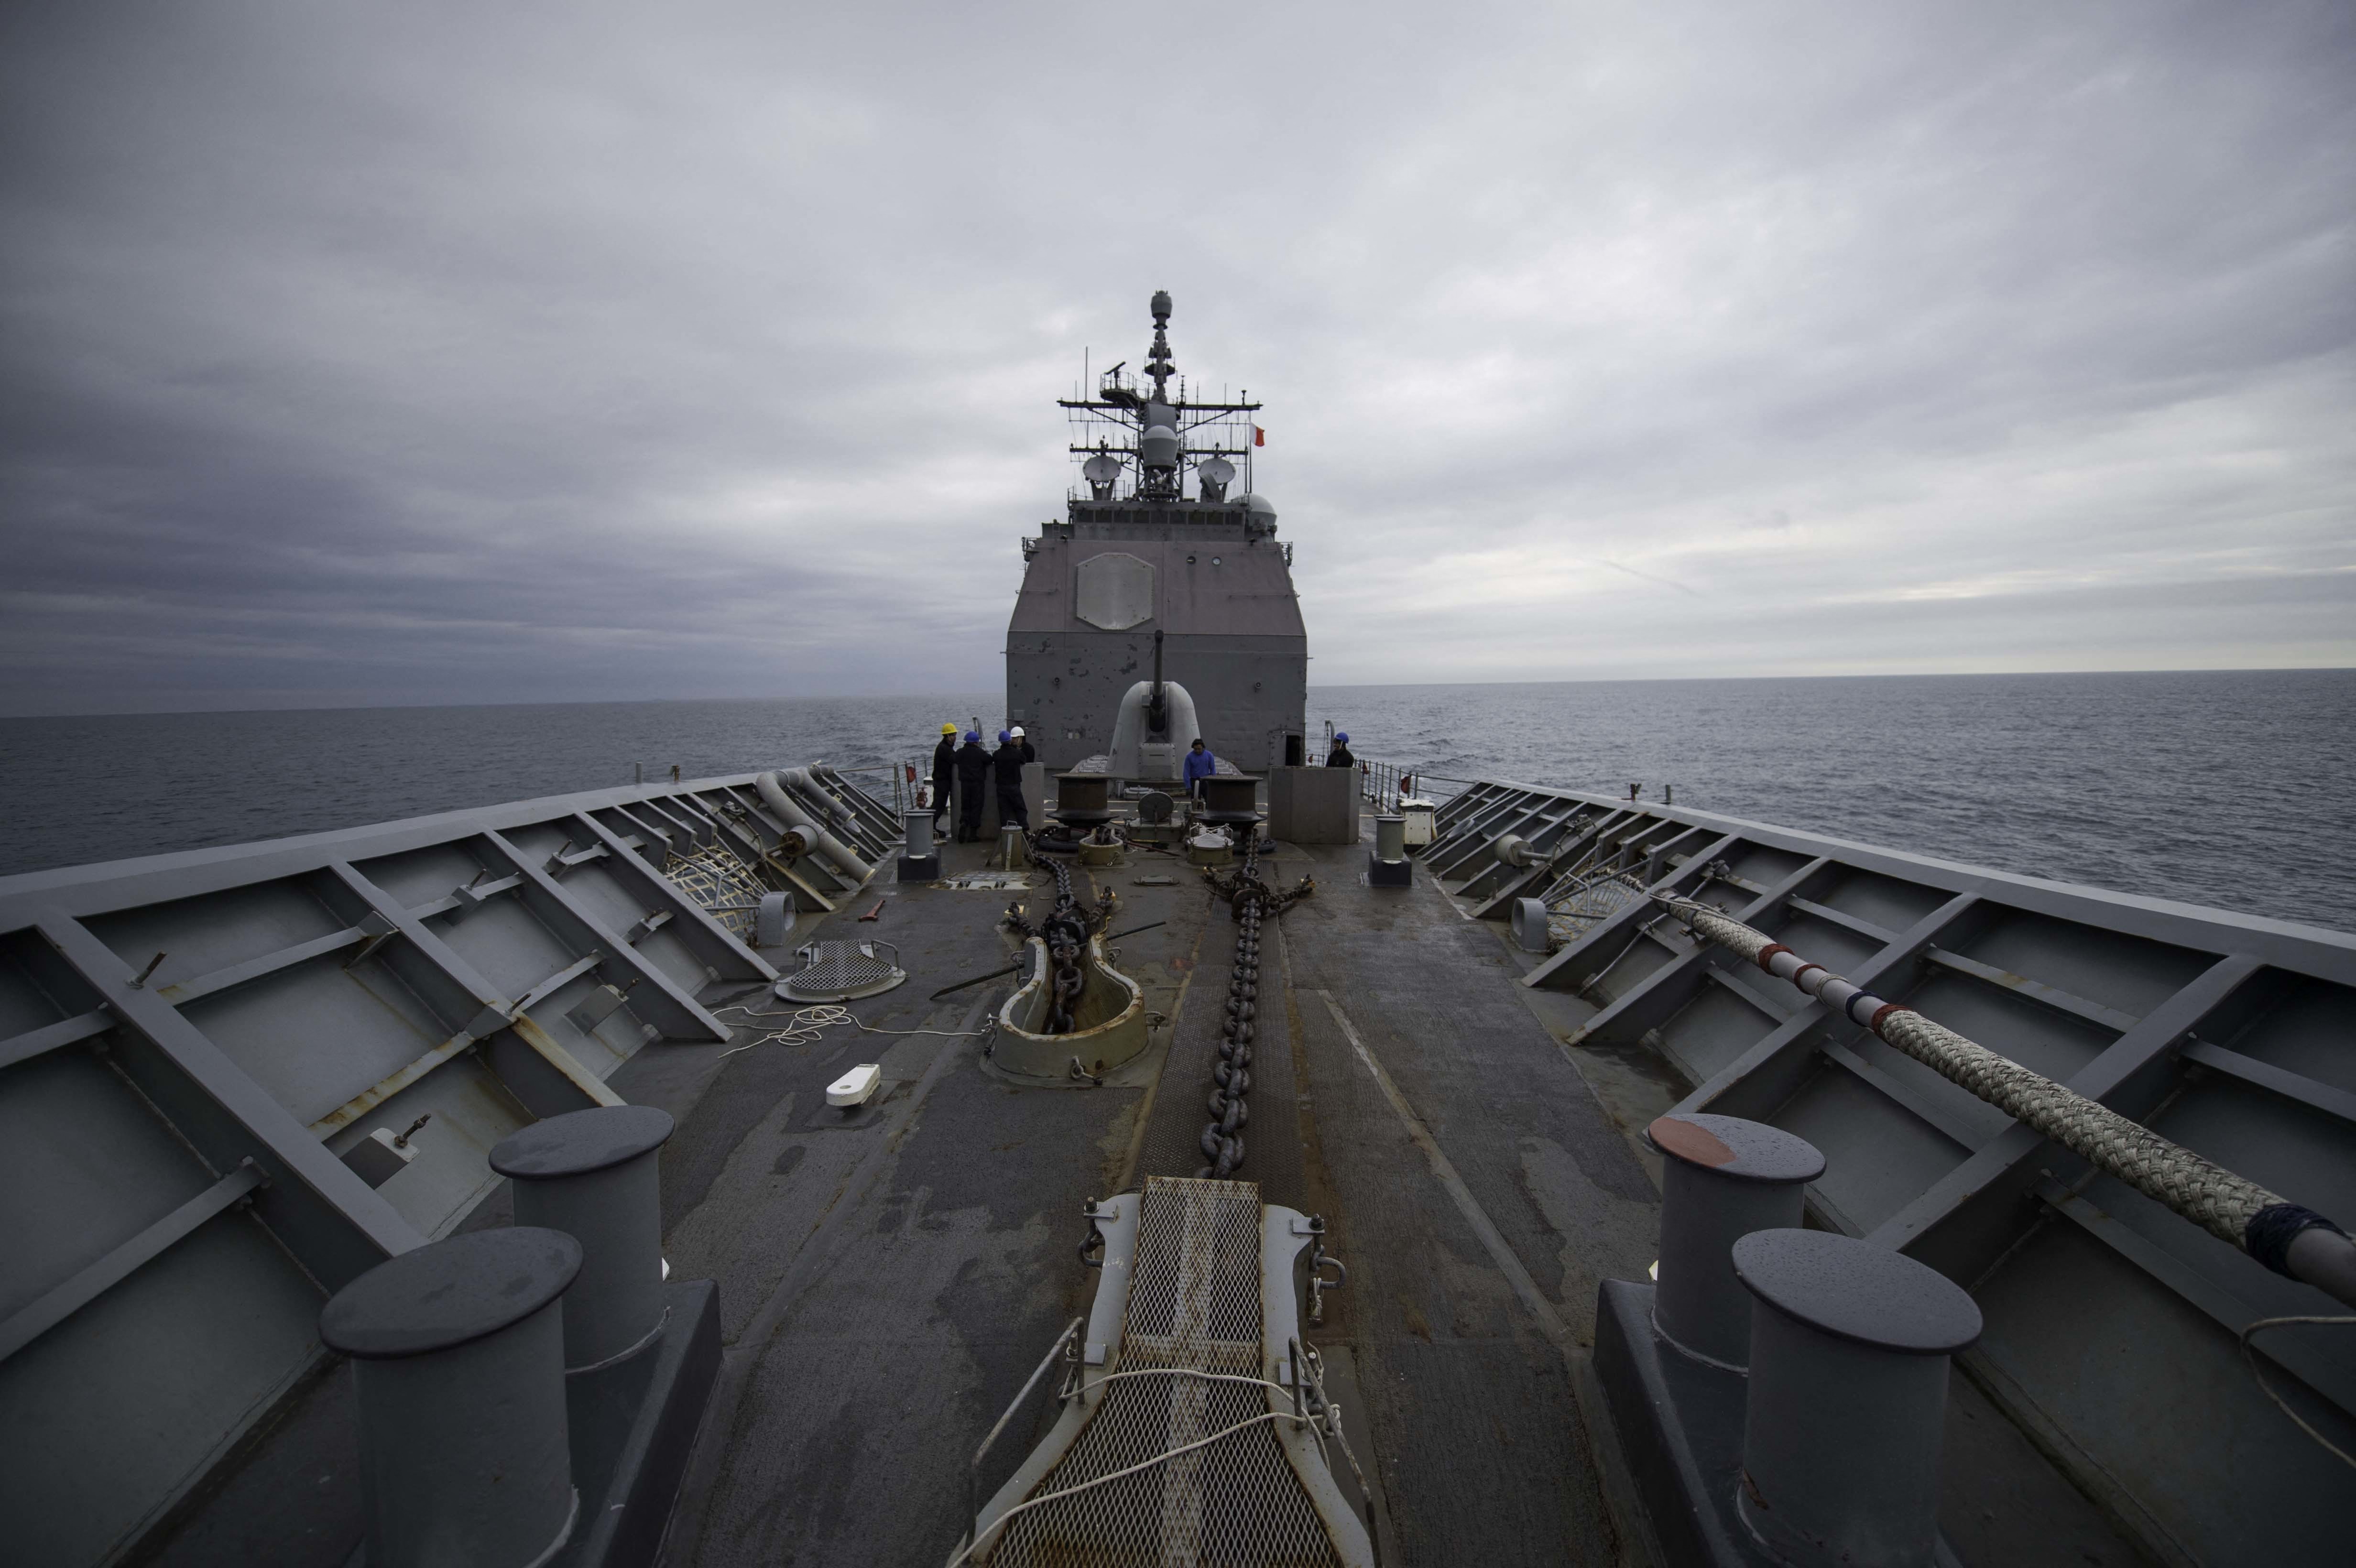 Handout file photo dated February 15, 2020 of Ticonderoga-class guided-missile cruiser USS Chancellorsville (CG 62) conducts normal underway operations transiting in the Taiwan Strait. Two United States Navy warships have entered the Taiwan Strait in what is the first US naval transit in the waterway since US-China tensions spiked this month over a visit to the island by House Speaker Nancy Pelosi. The guided-missile cruisers USS Antietam and USS Chancellorsville were on Sunday making the voyage "through waters where high seas freedoms of navigation and overflight apply in accordance with international law," the US 7th Fleet in Japan said in a statement. It said the transit was "ongoing" and that there had been "no interference from foreign military forces so far." U.S. Navy photo by Mass Communication Specialist 1st Class Gregory N. Juday via ABACAPRESS.COM